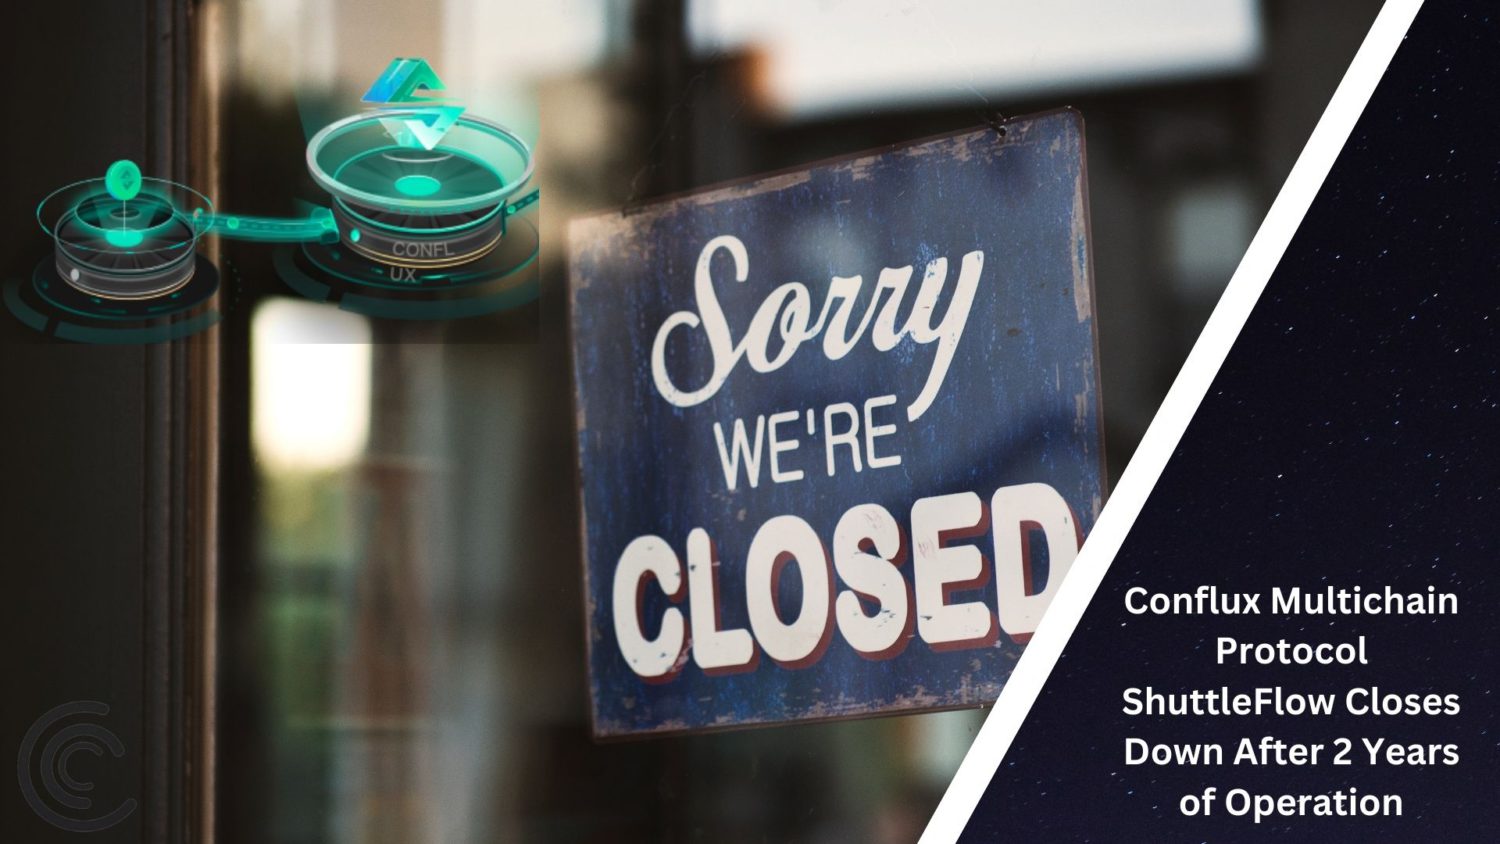 Conflux Multichain Protocol Shuttleflow Closes Down After 2 Years Of Operation